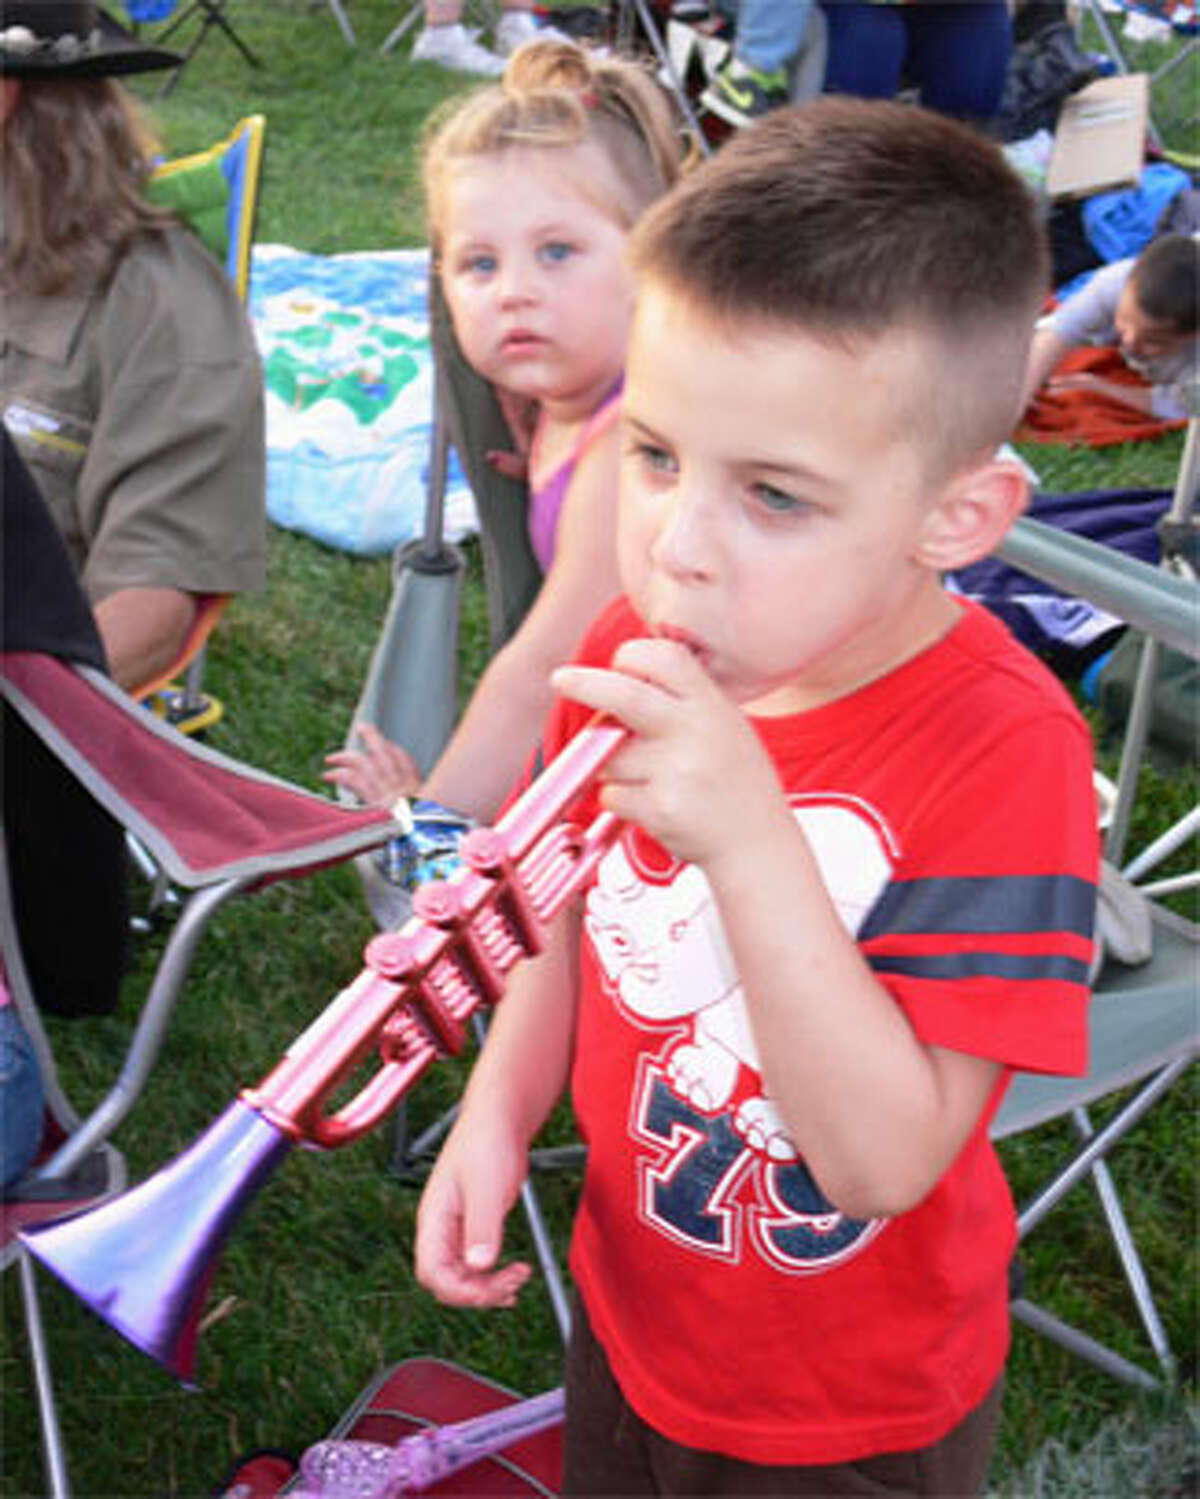 Julian Barone, 5, plays a plastic trumpet while his sister Madeline, 2, observes. They were with father Kevin and other family members. (Photo by Brad Durrell)